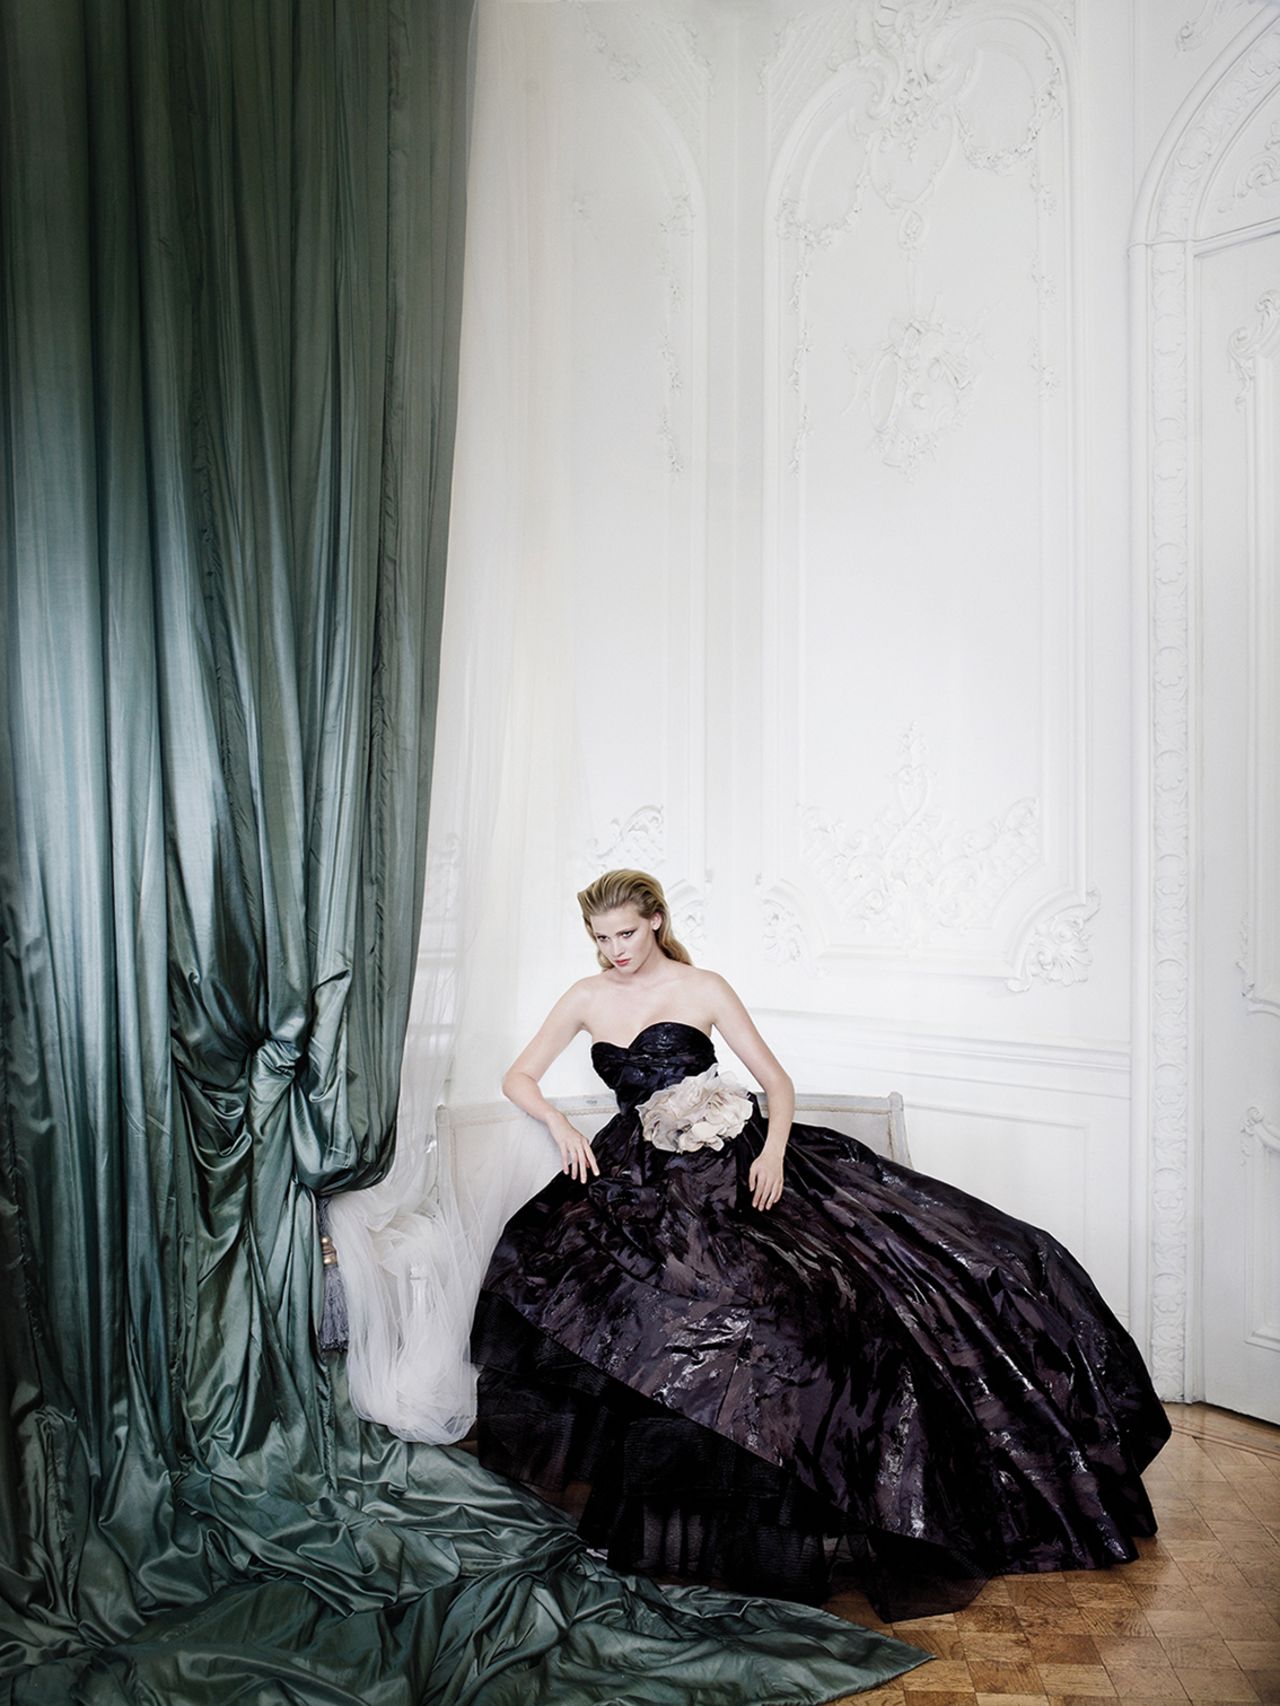 Lara Stone in Carlton House Terrace by Mario Testino, 2009. Vogue 100: A Century of Style is at the National Portrait Gallery, London, from 11 February-22 May 2016, sponsored by Leon Max.